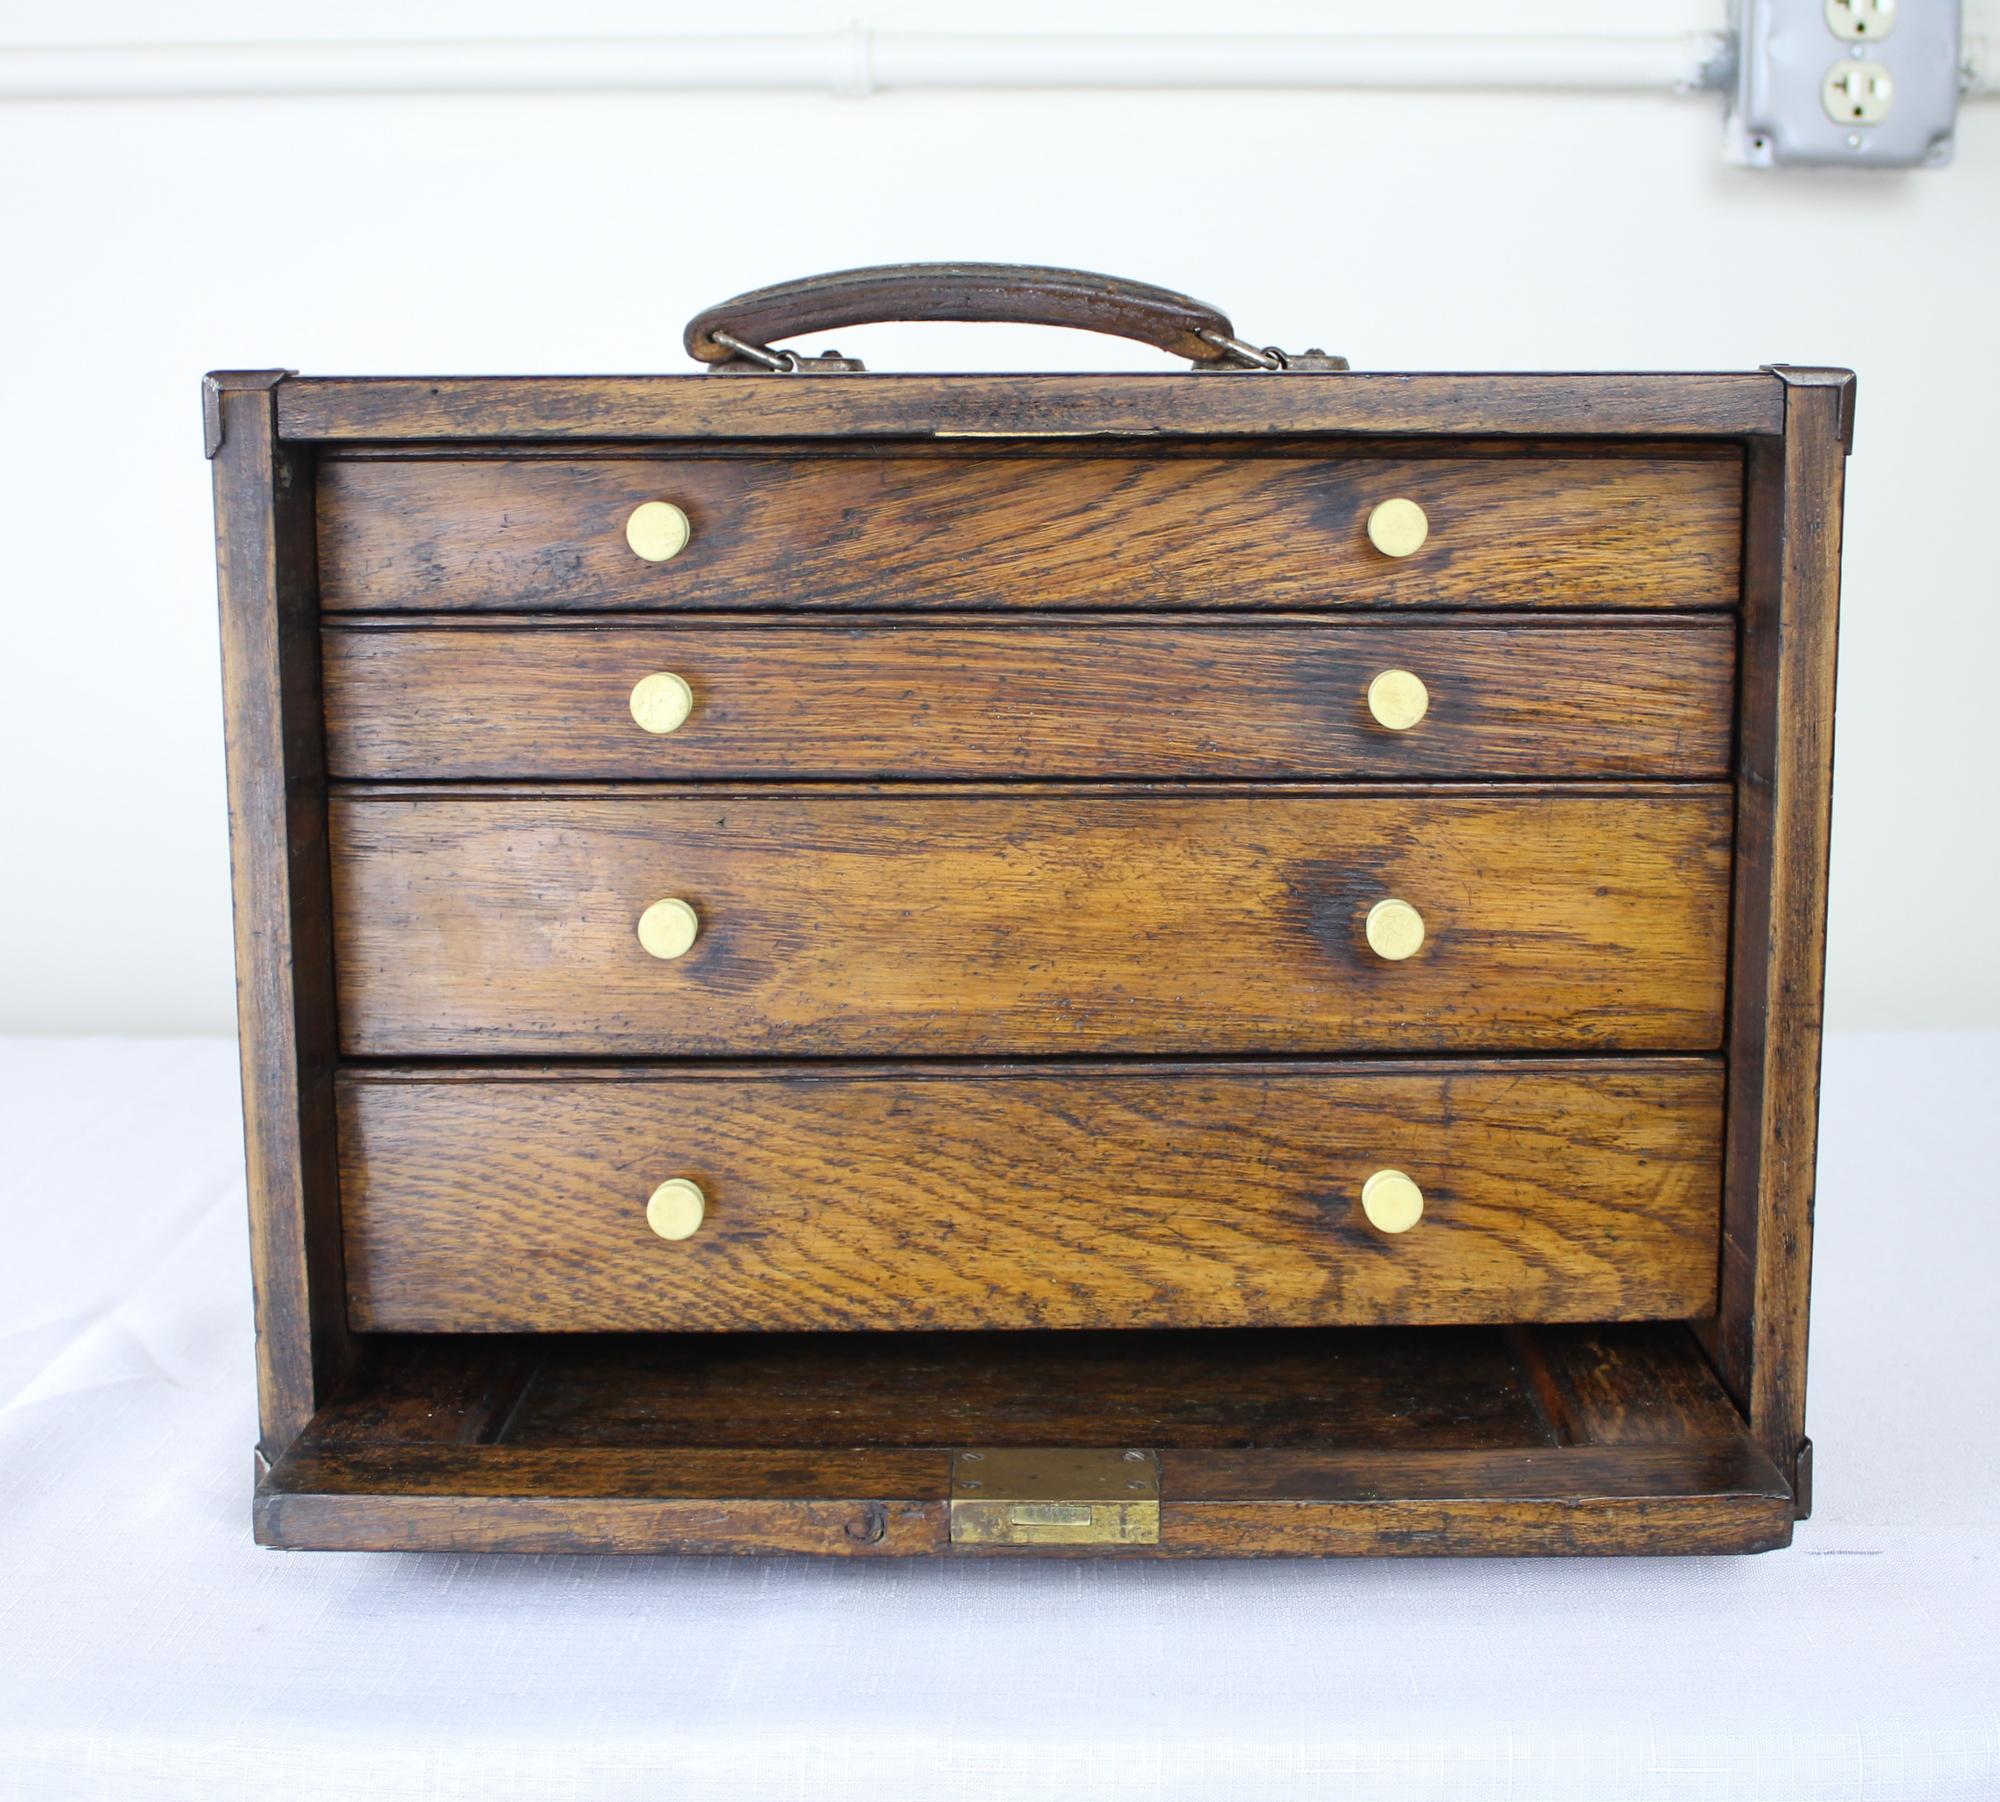 A miniature English oak Campaign chest of drawers with working key. Most likely used by politicians and business men on the road. We love the pull out / pull-out door and bakelite drawer knobs. Good visible dovetailing at the corners. Very